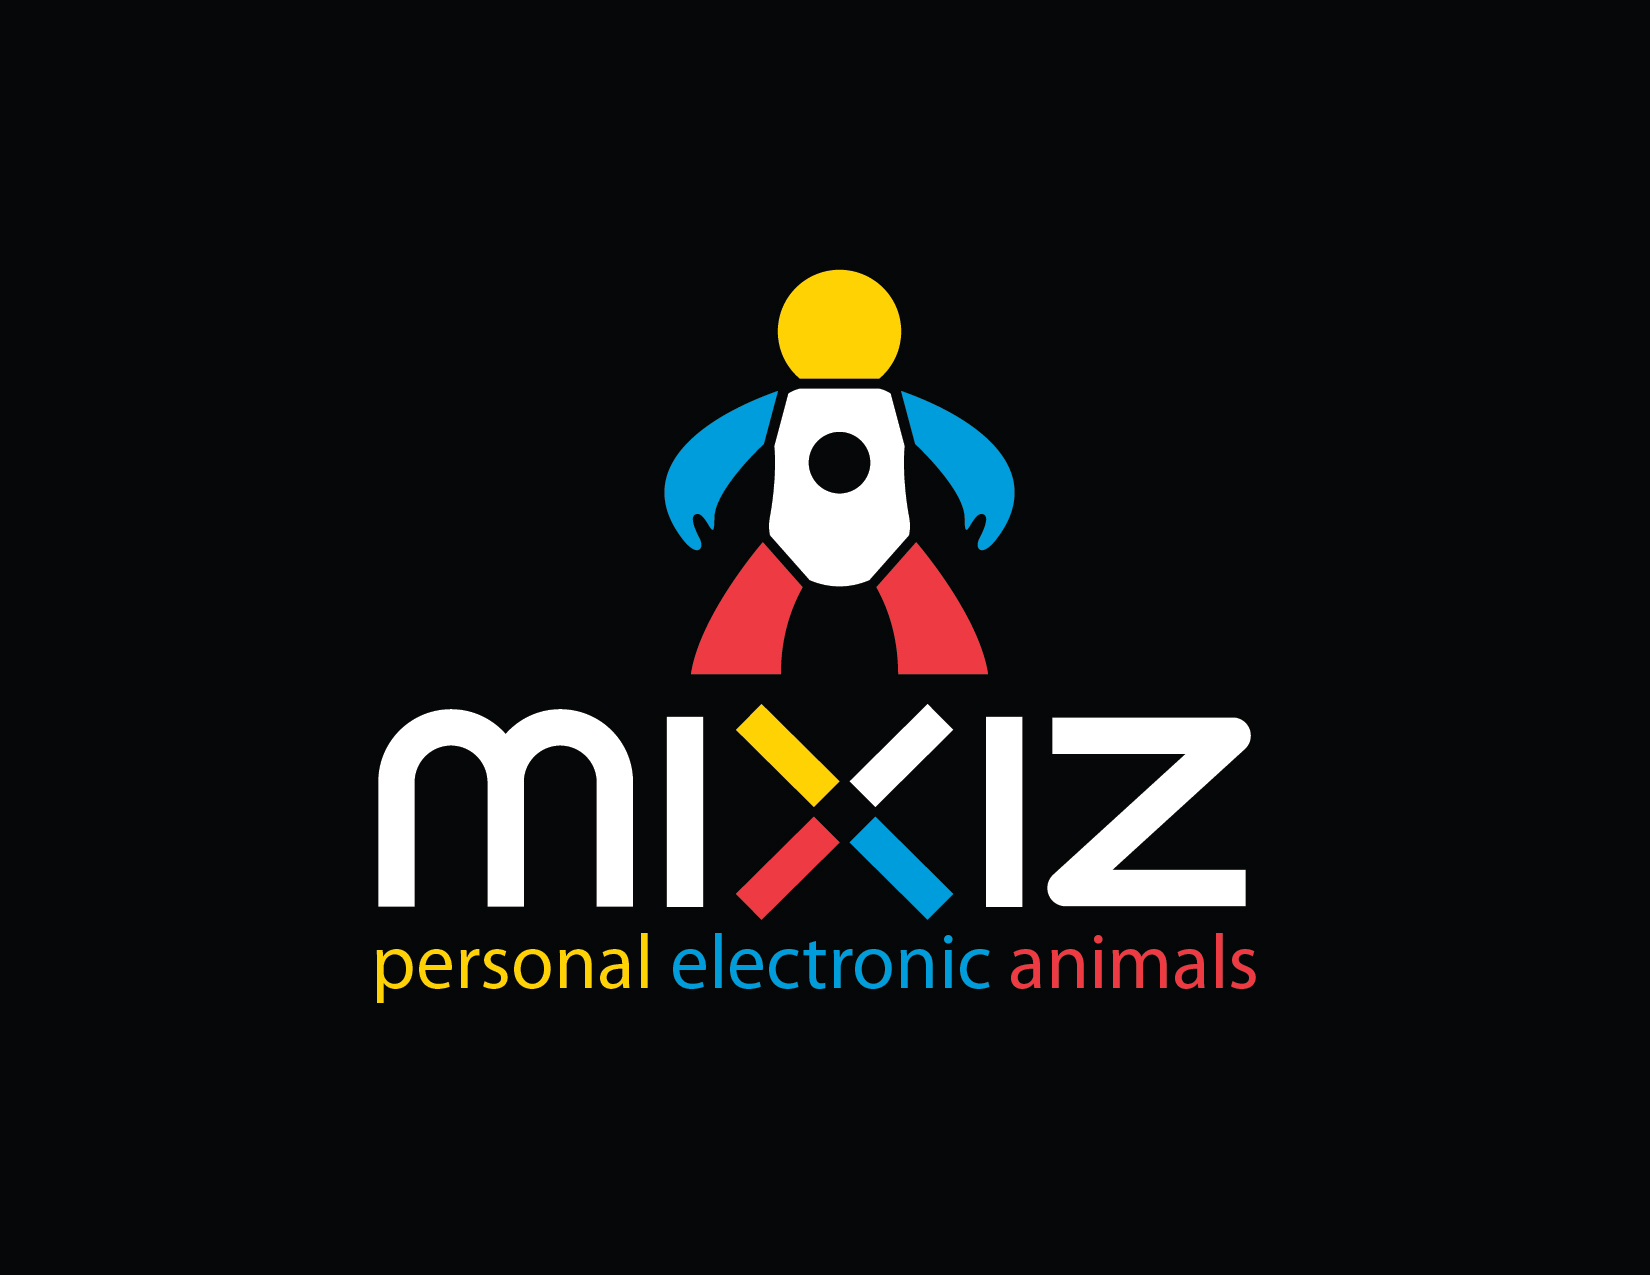 110212-NYC-mixiz-toy-presentation_Page_01.png